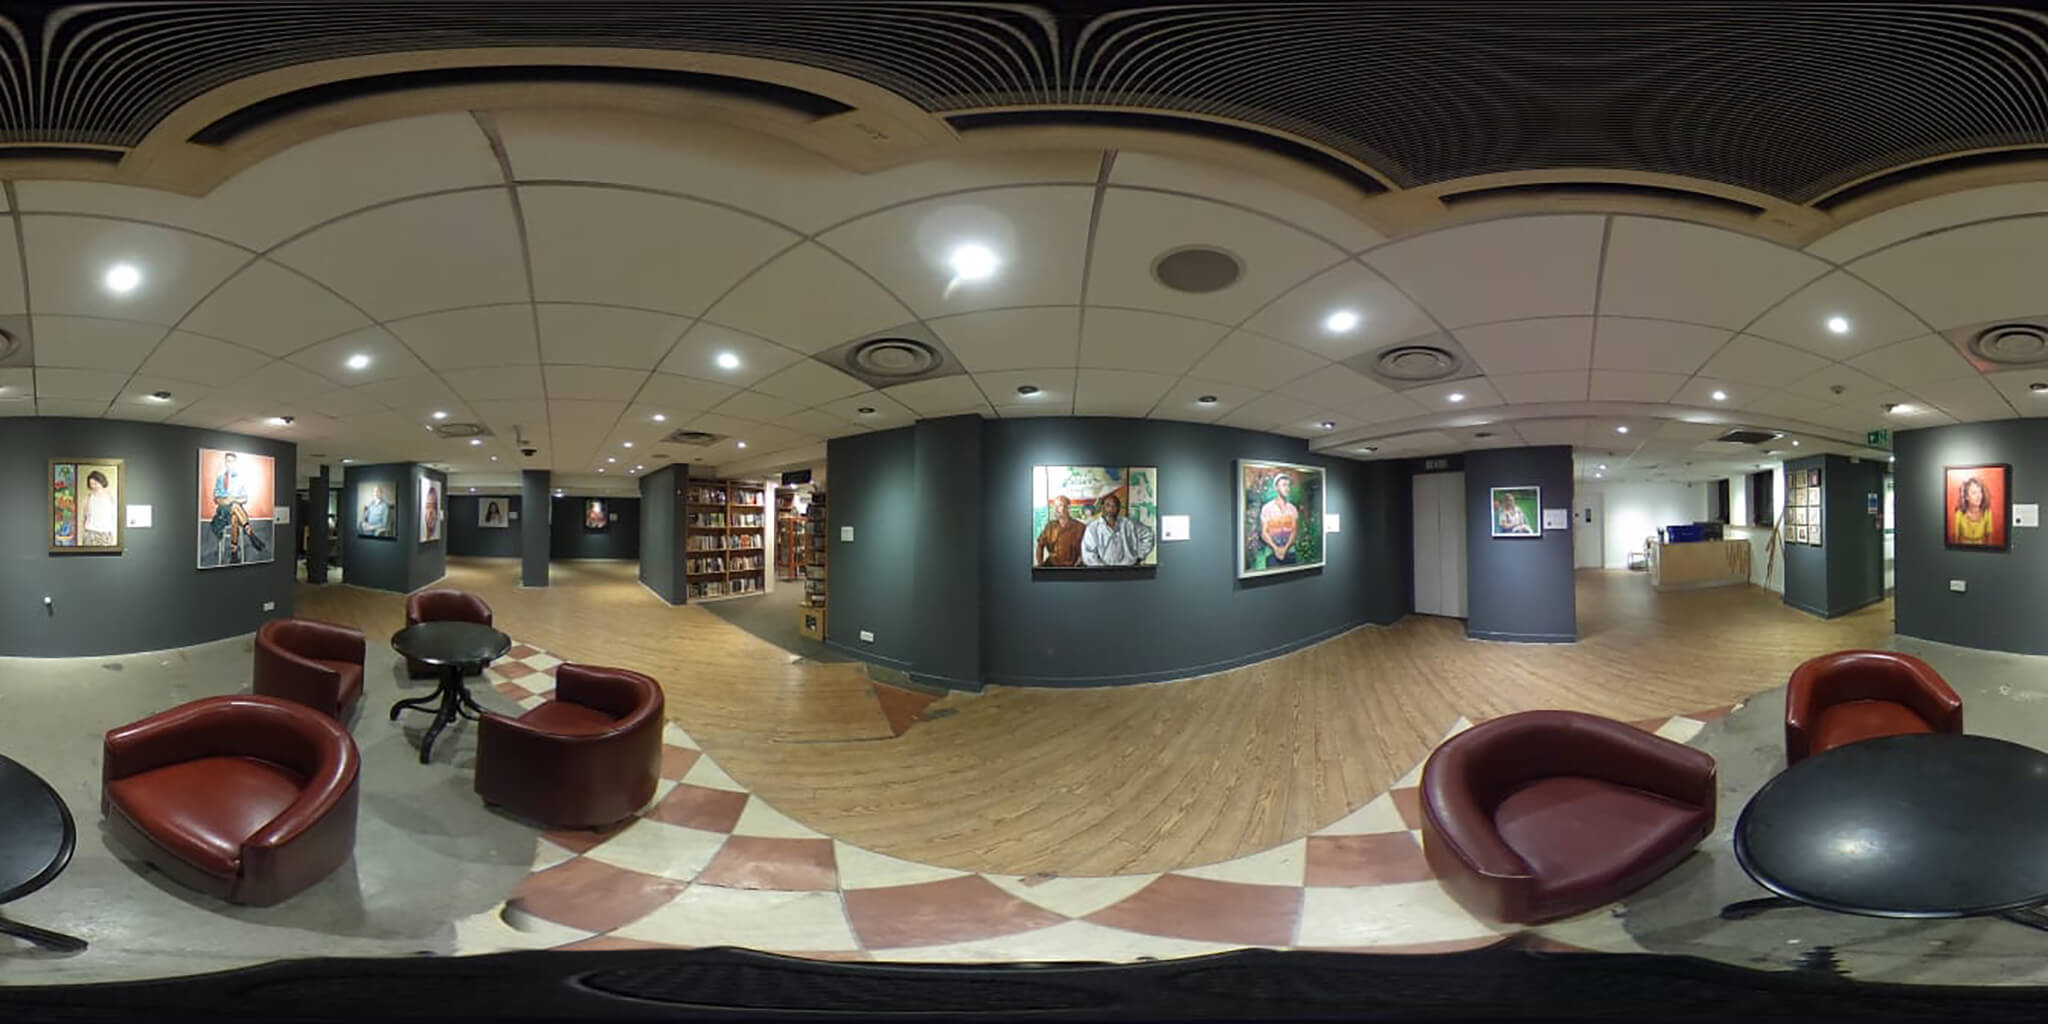 Connected The Changing face of Britain by the Lots Road Group 360 degree image of exhibition with Stella Tooth's portrait centre.